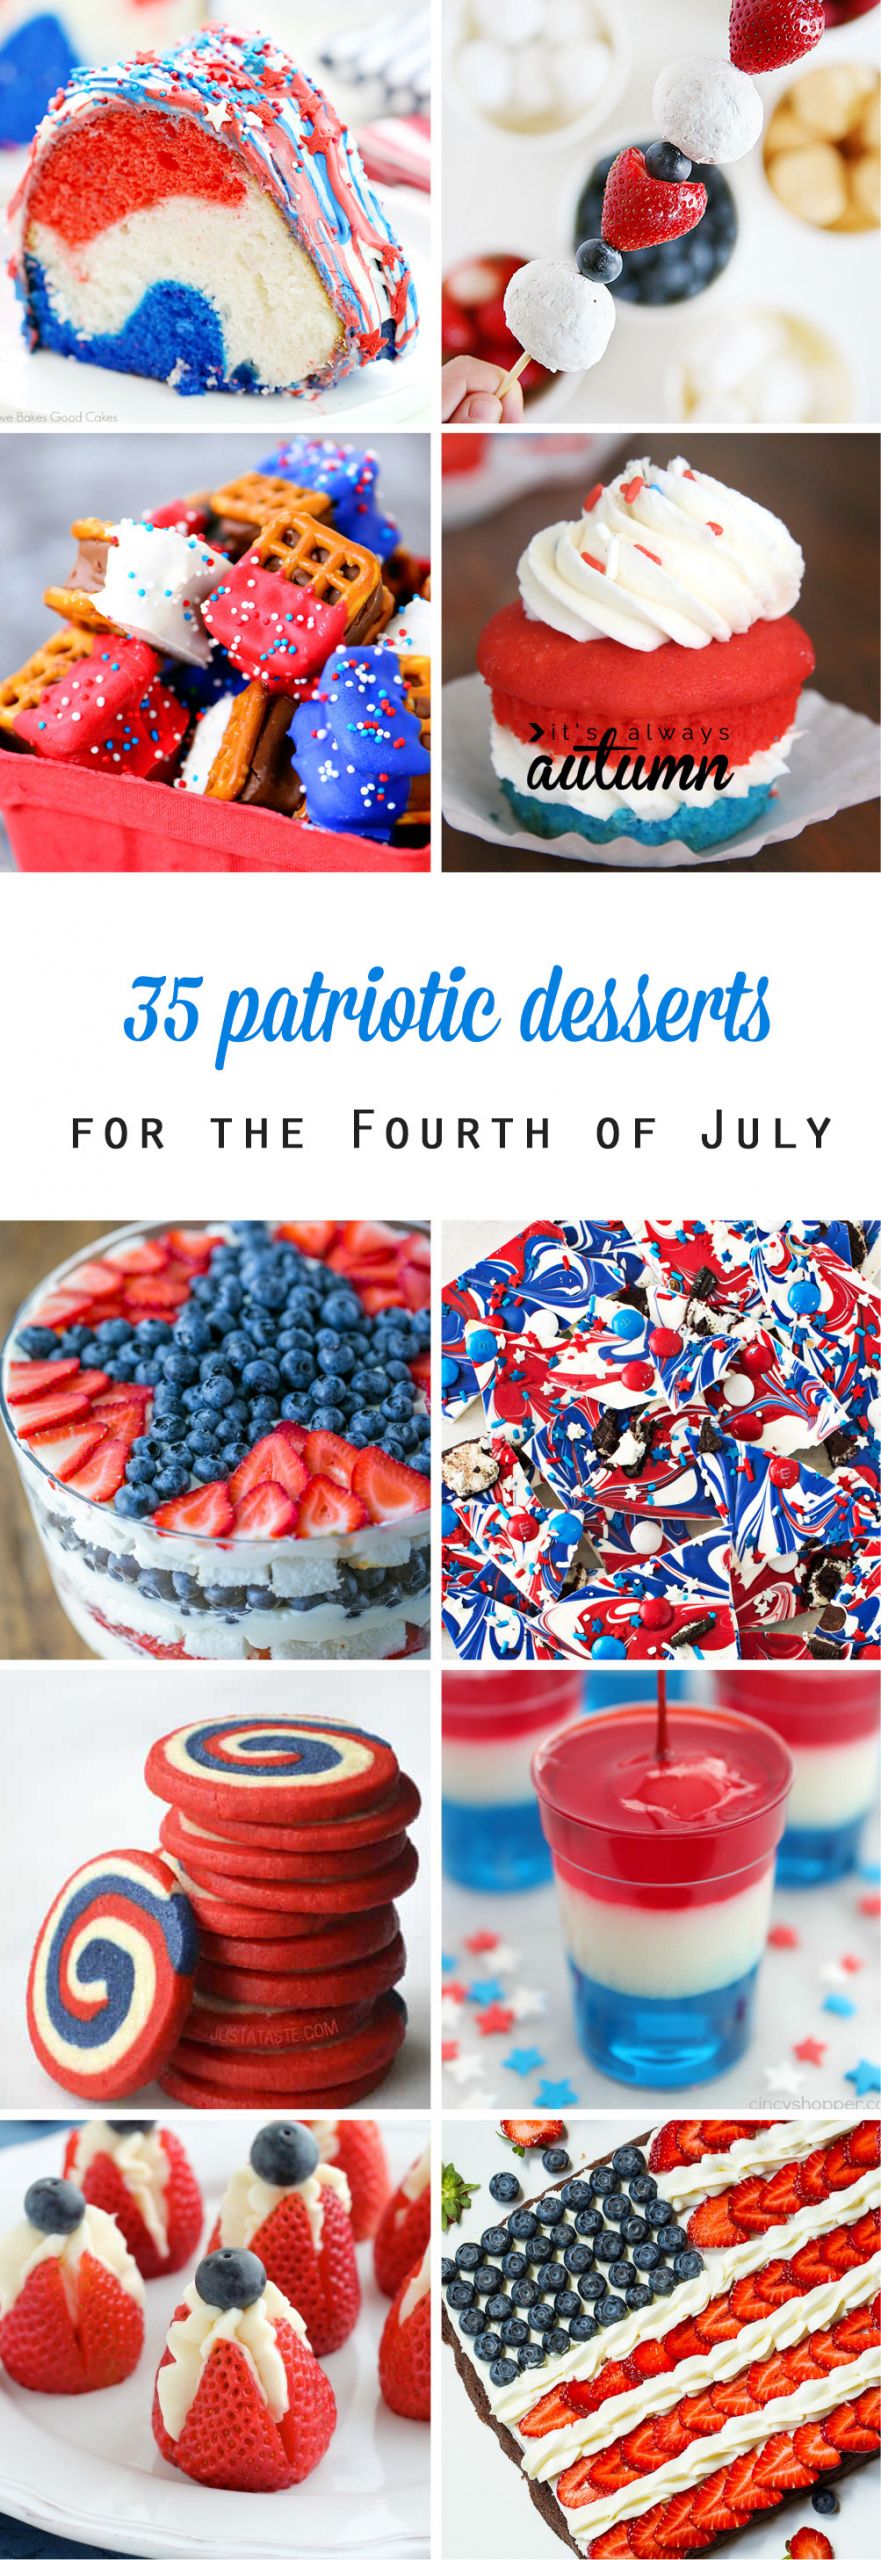 4Th Of July Cake Recipes
 20 red white and blue desserts for the Fourth of July